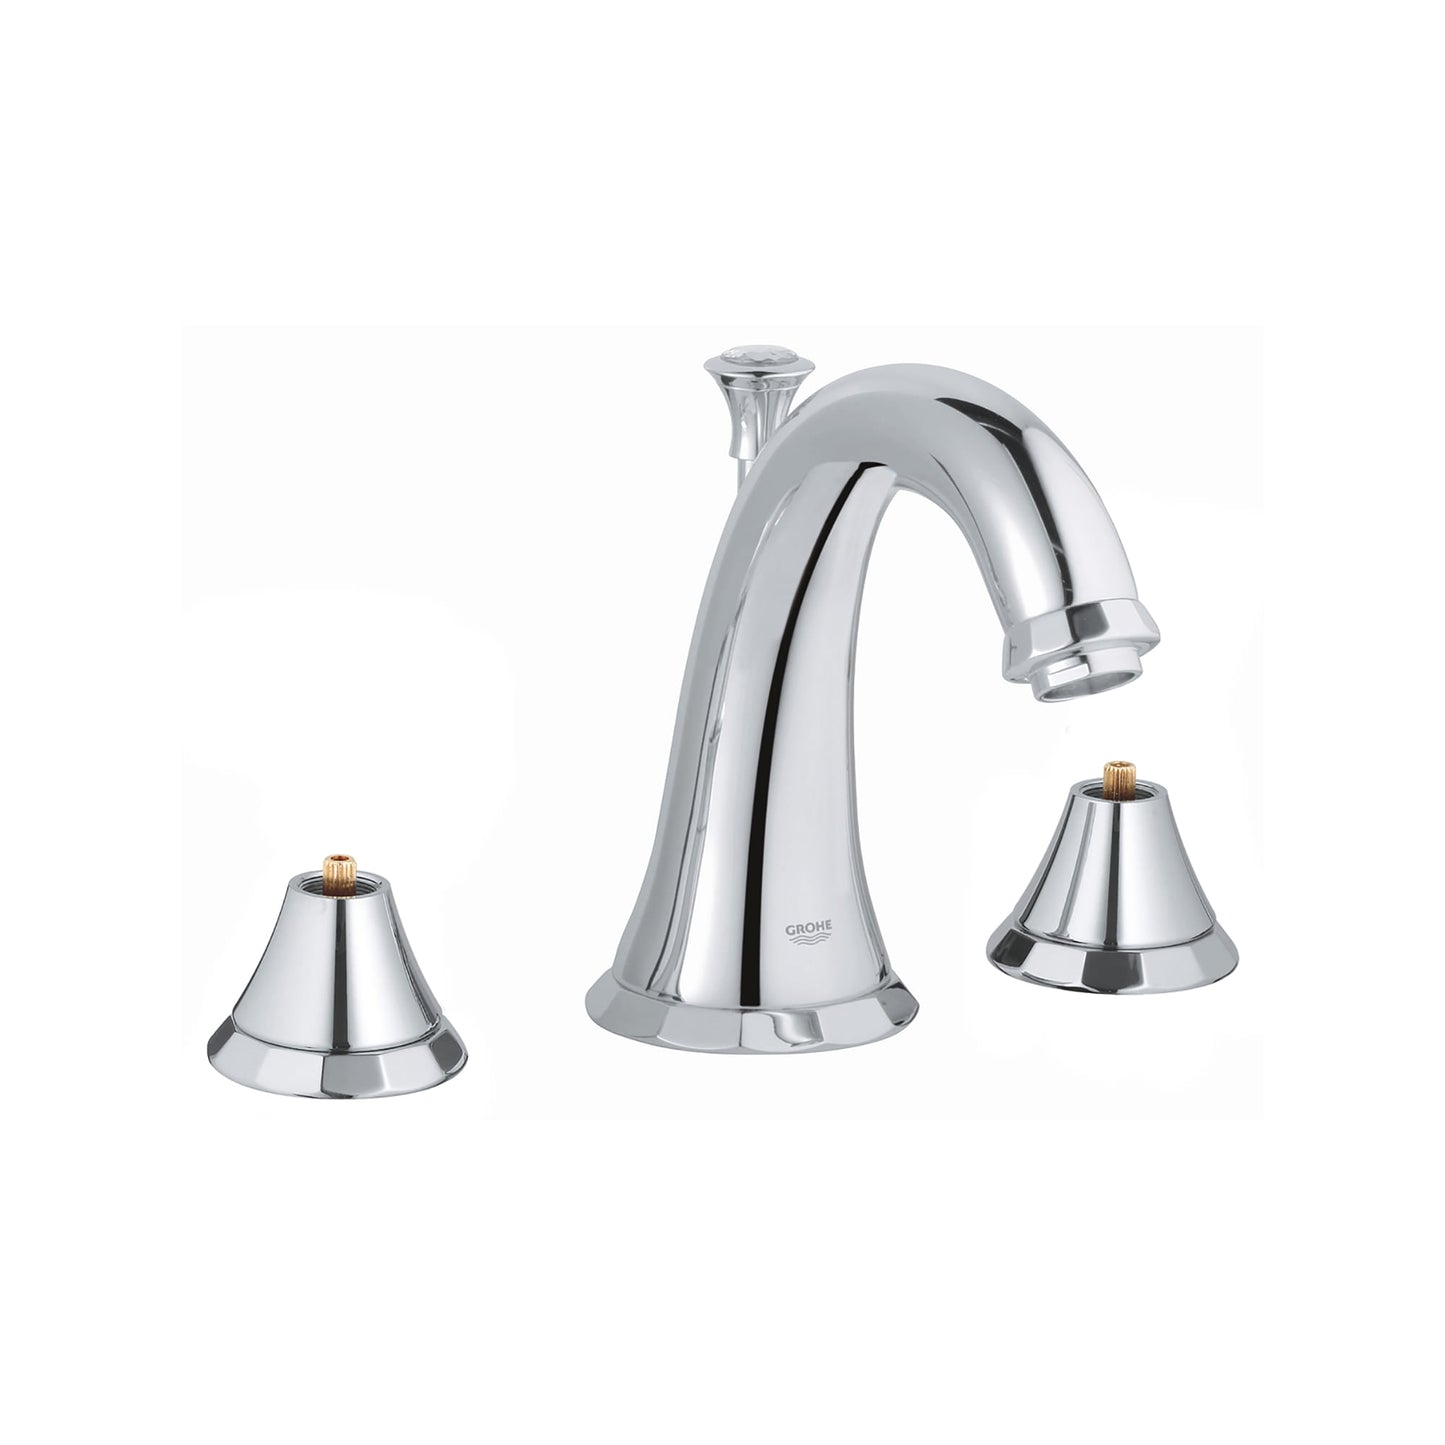 GROHE 2012400A Kensington Chrome 8-inch Widespread 2-Handle S-Size Bathroom Faucet 1.2 GPM